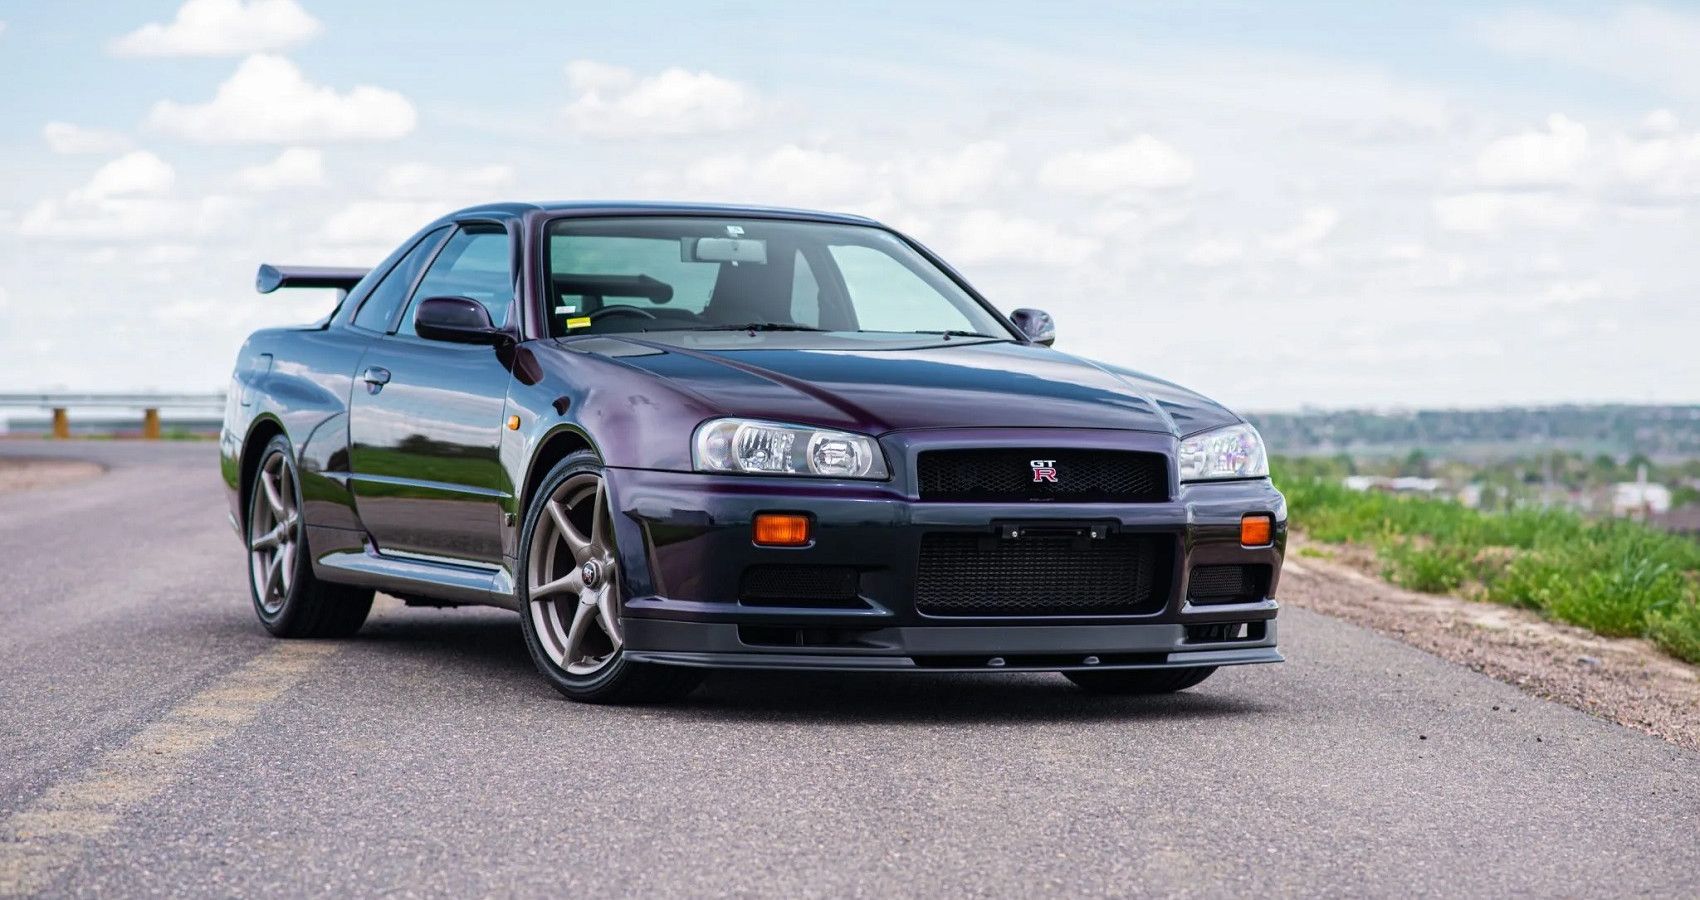 5 Things We Love About The R34 Nissan Skyline GT-R (5 Reasons Why We Think  It's Ridiculously Overpriced)